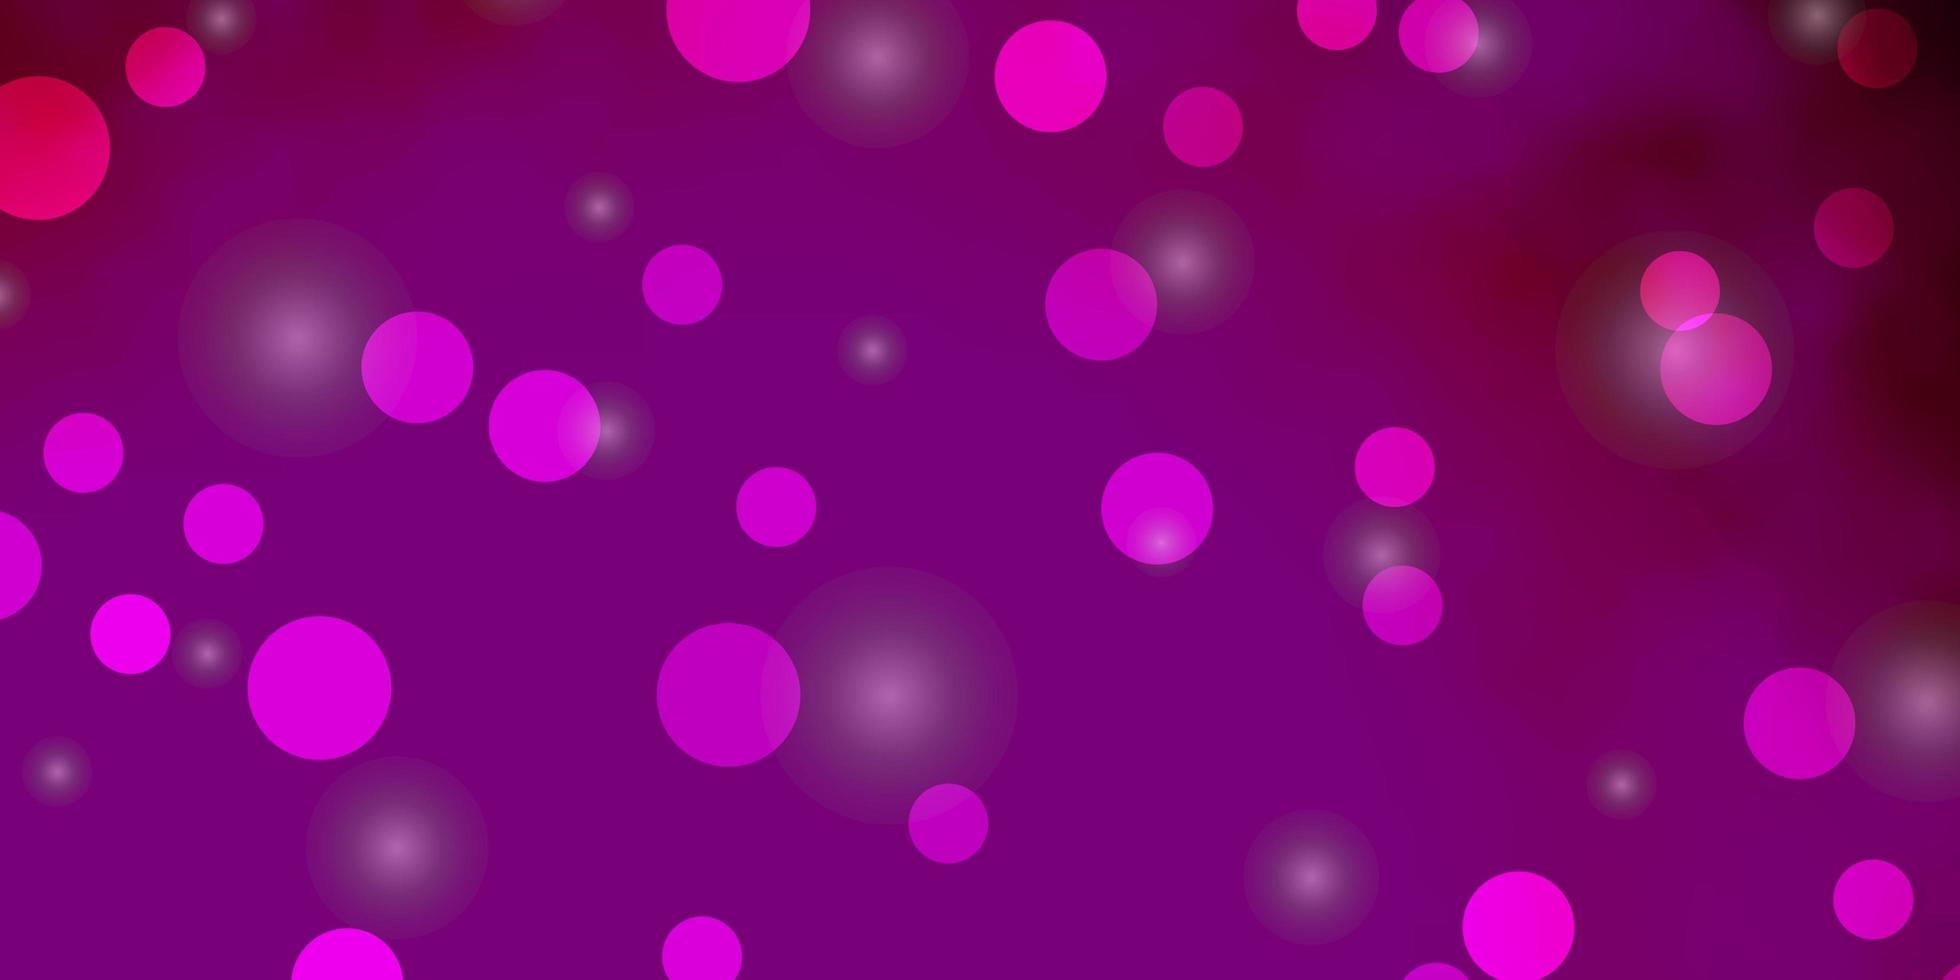 Light Pink vector template with circles, stars.